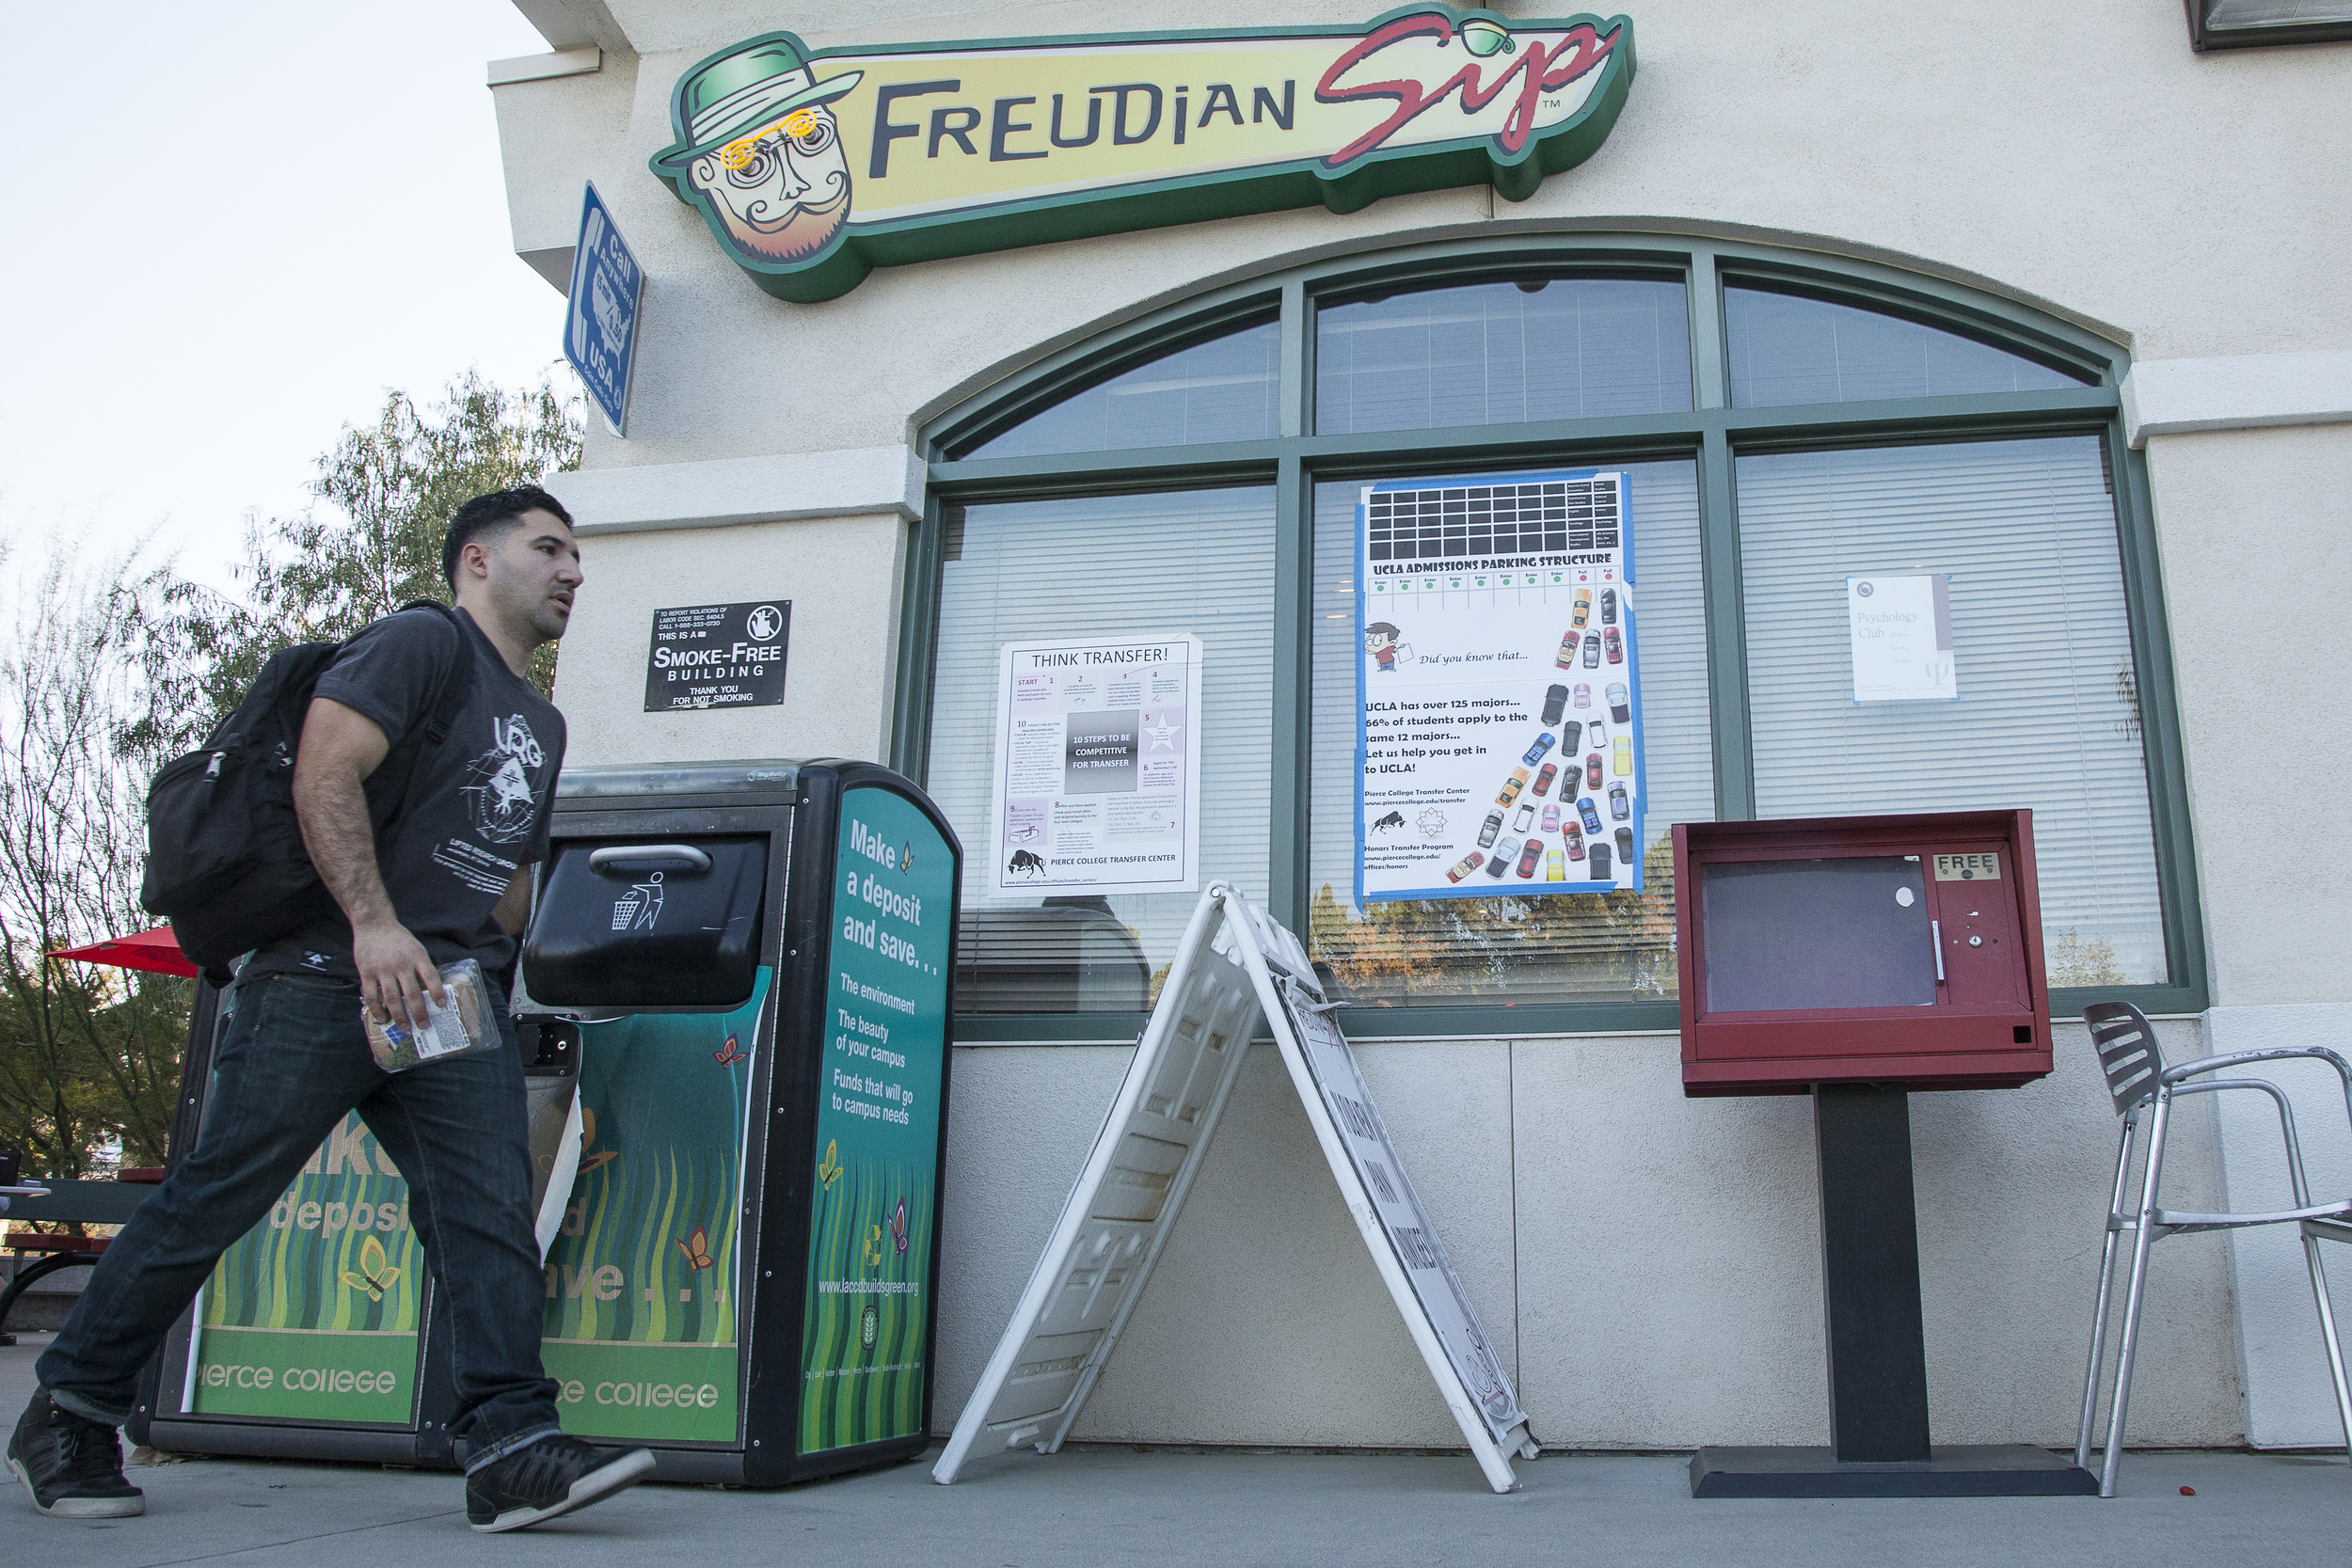  Engineering major Walter Moreno, 25, walks in front of the Freudian Sip on Thursday, Feb. 25, 2016 in Woodland Hills, Calif. The Student Store plans to rebrand the Freudian Sip this semester and the new, unnamed cafe, will open sometime during the S